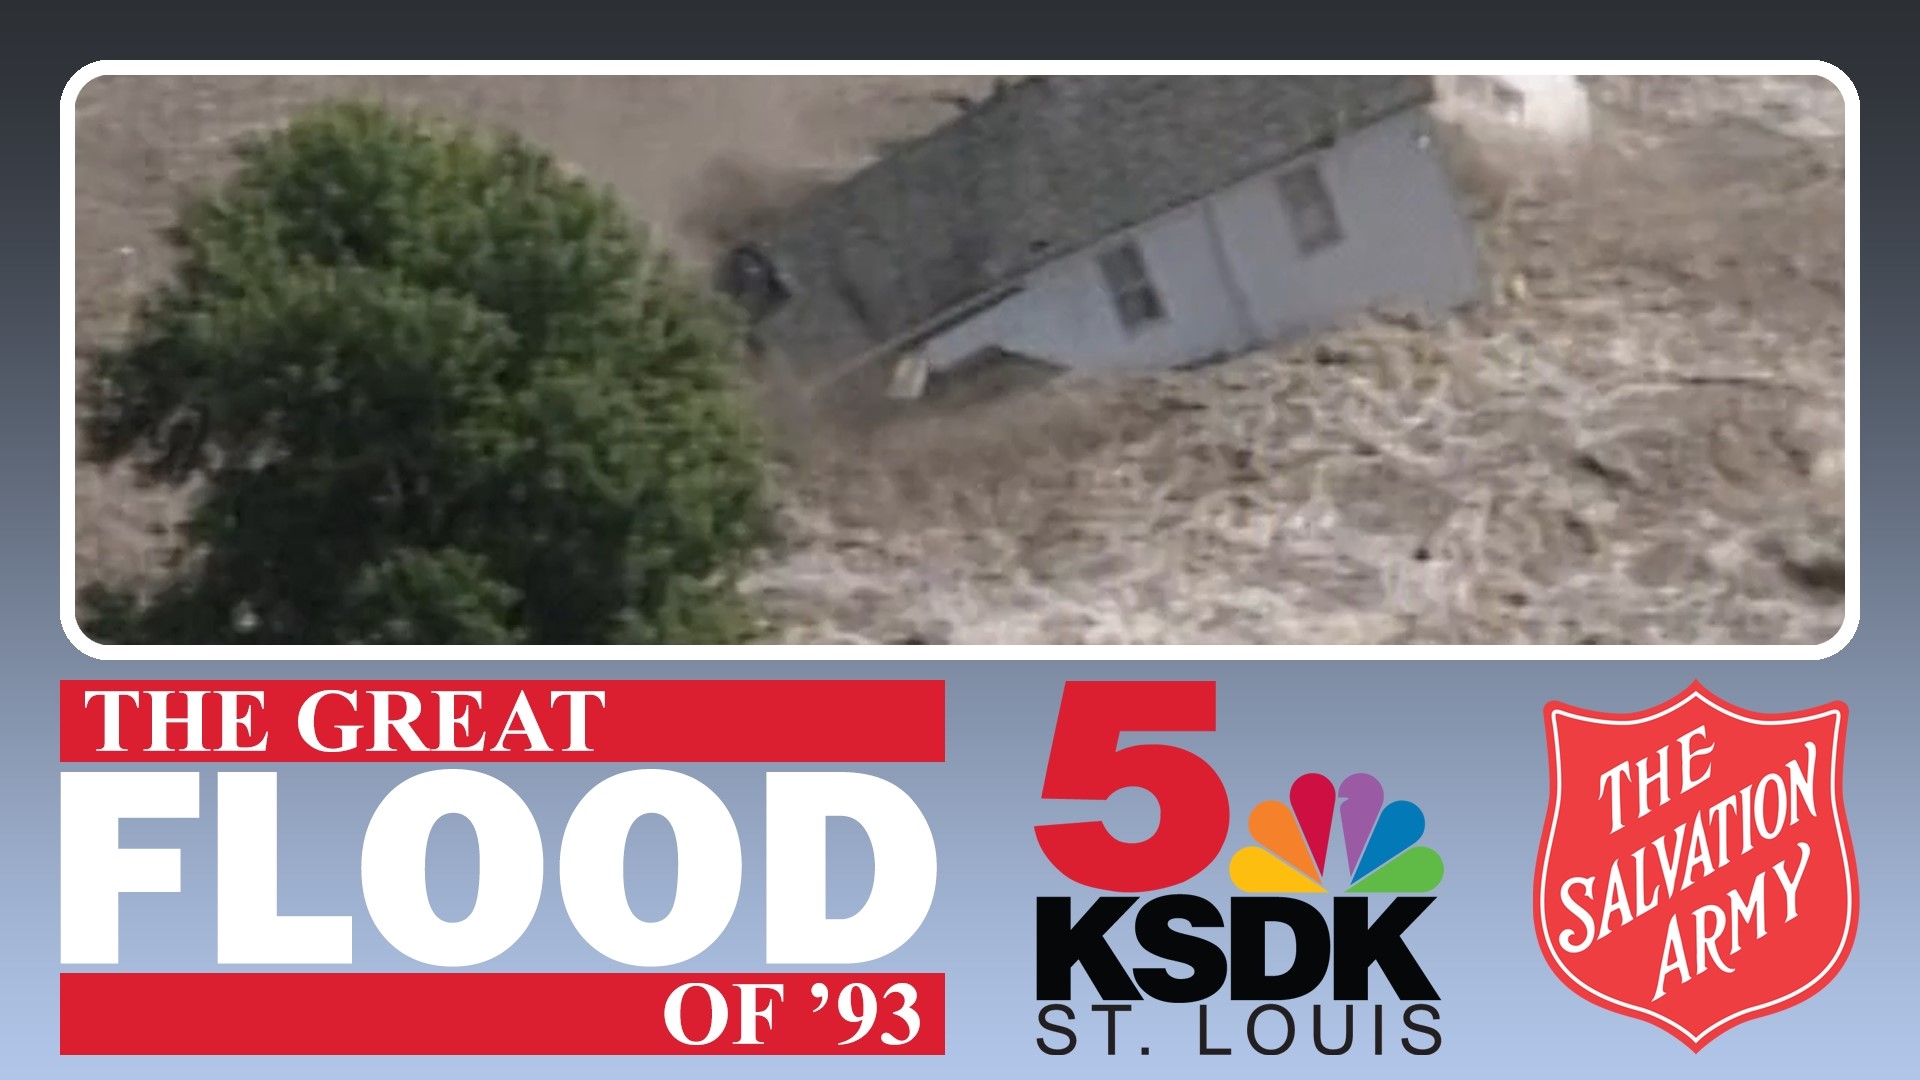 It's the story of the Great Flood of '93 as seen through the cameras and reporters of KSDK. Travel up and down area rivers as communities battle the rising waters.